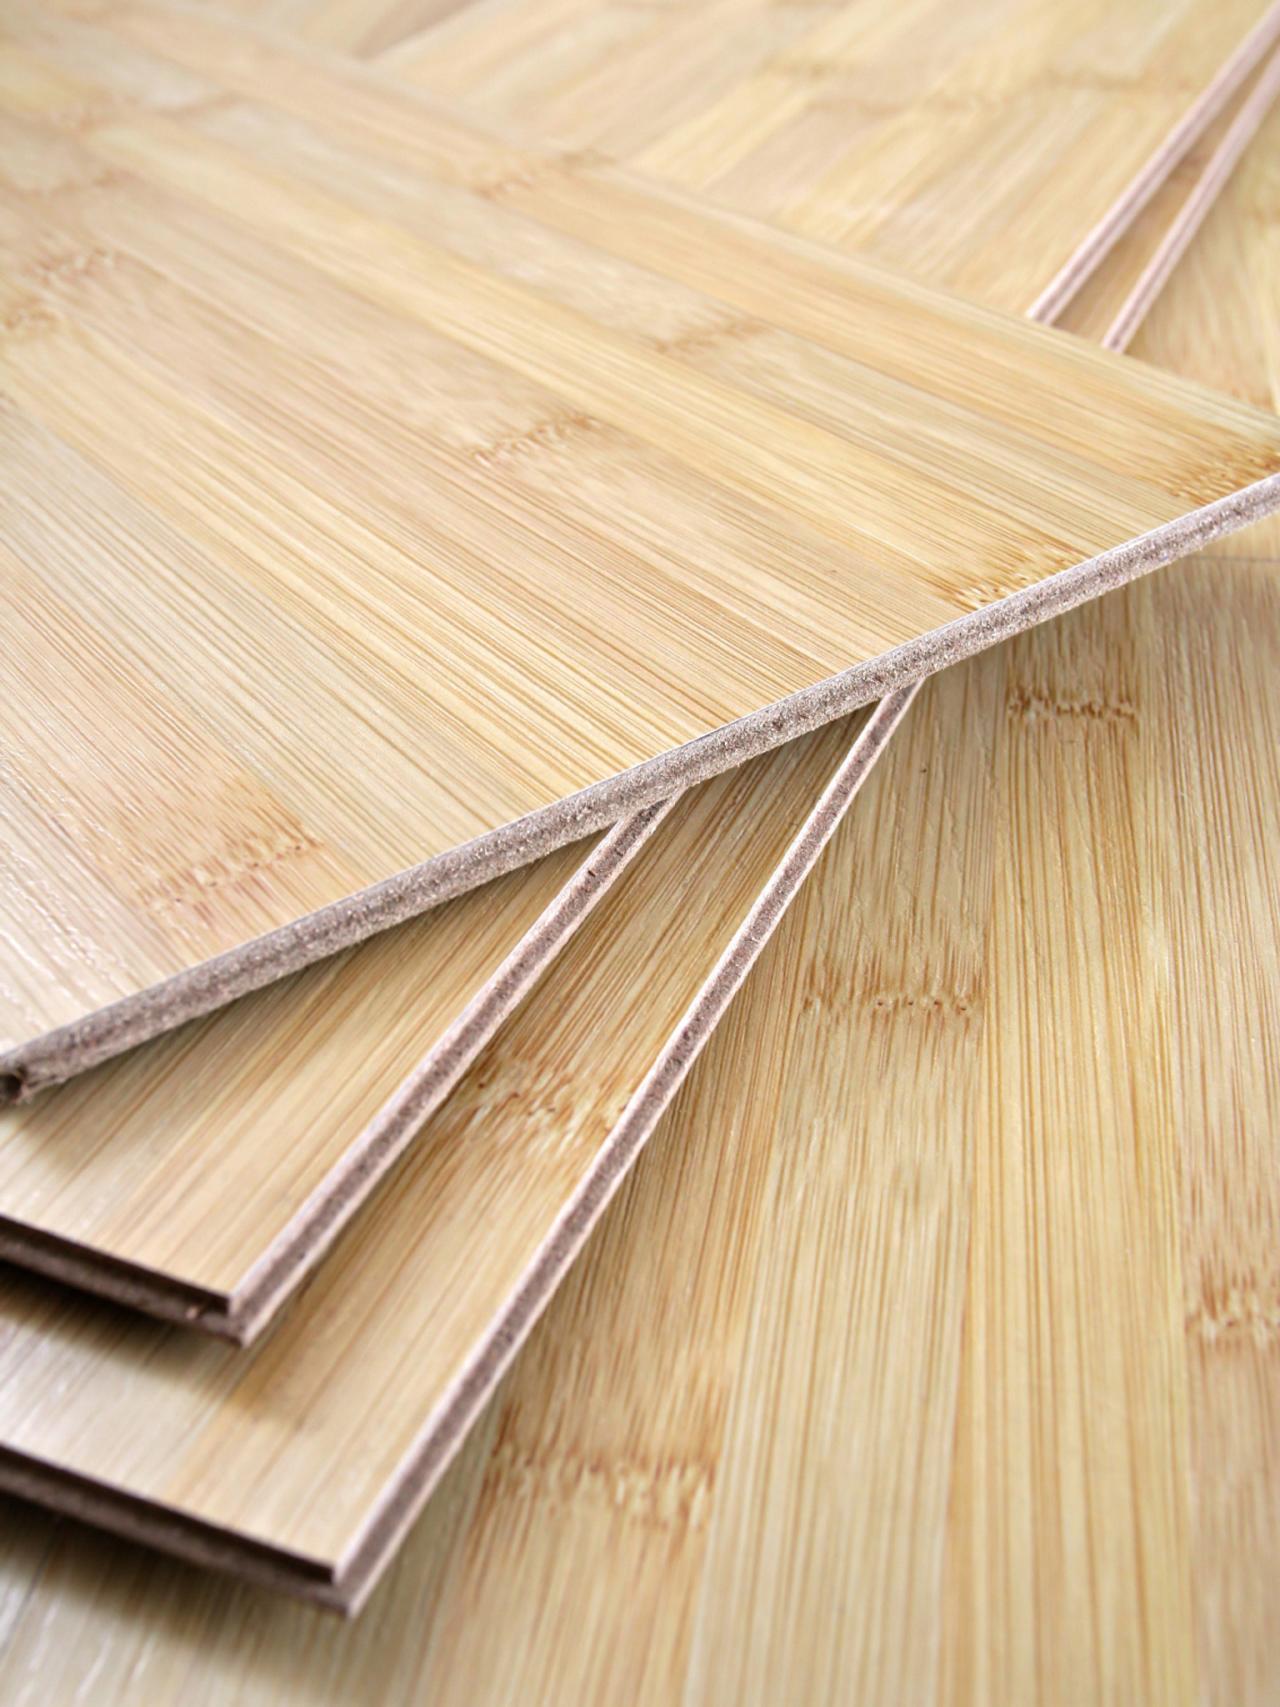 The Pros And Cons Of Bamboo Flooring Diy,Hungry Ghost Jokes